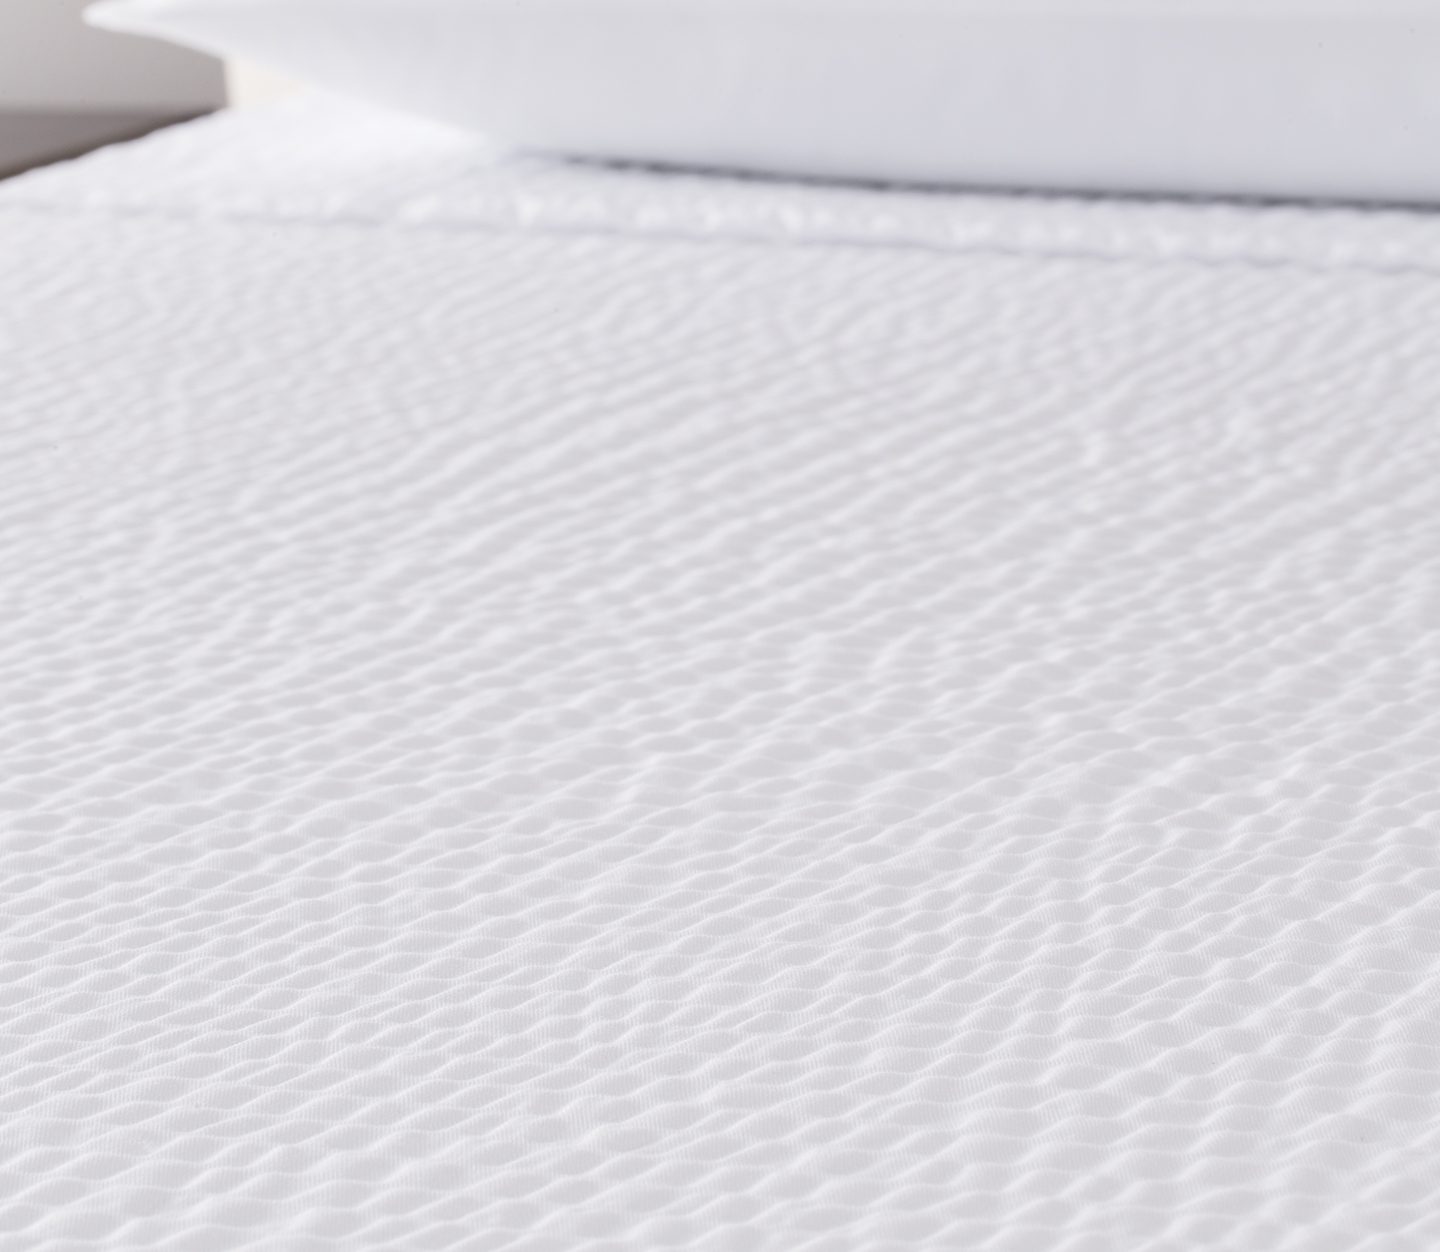 white bed sheet texture